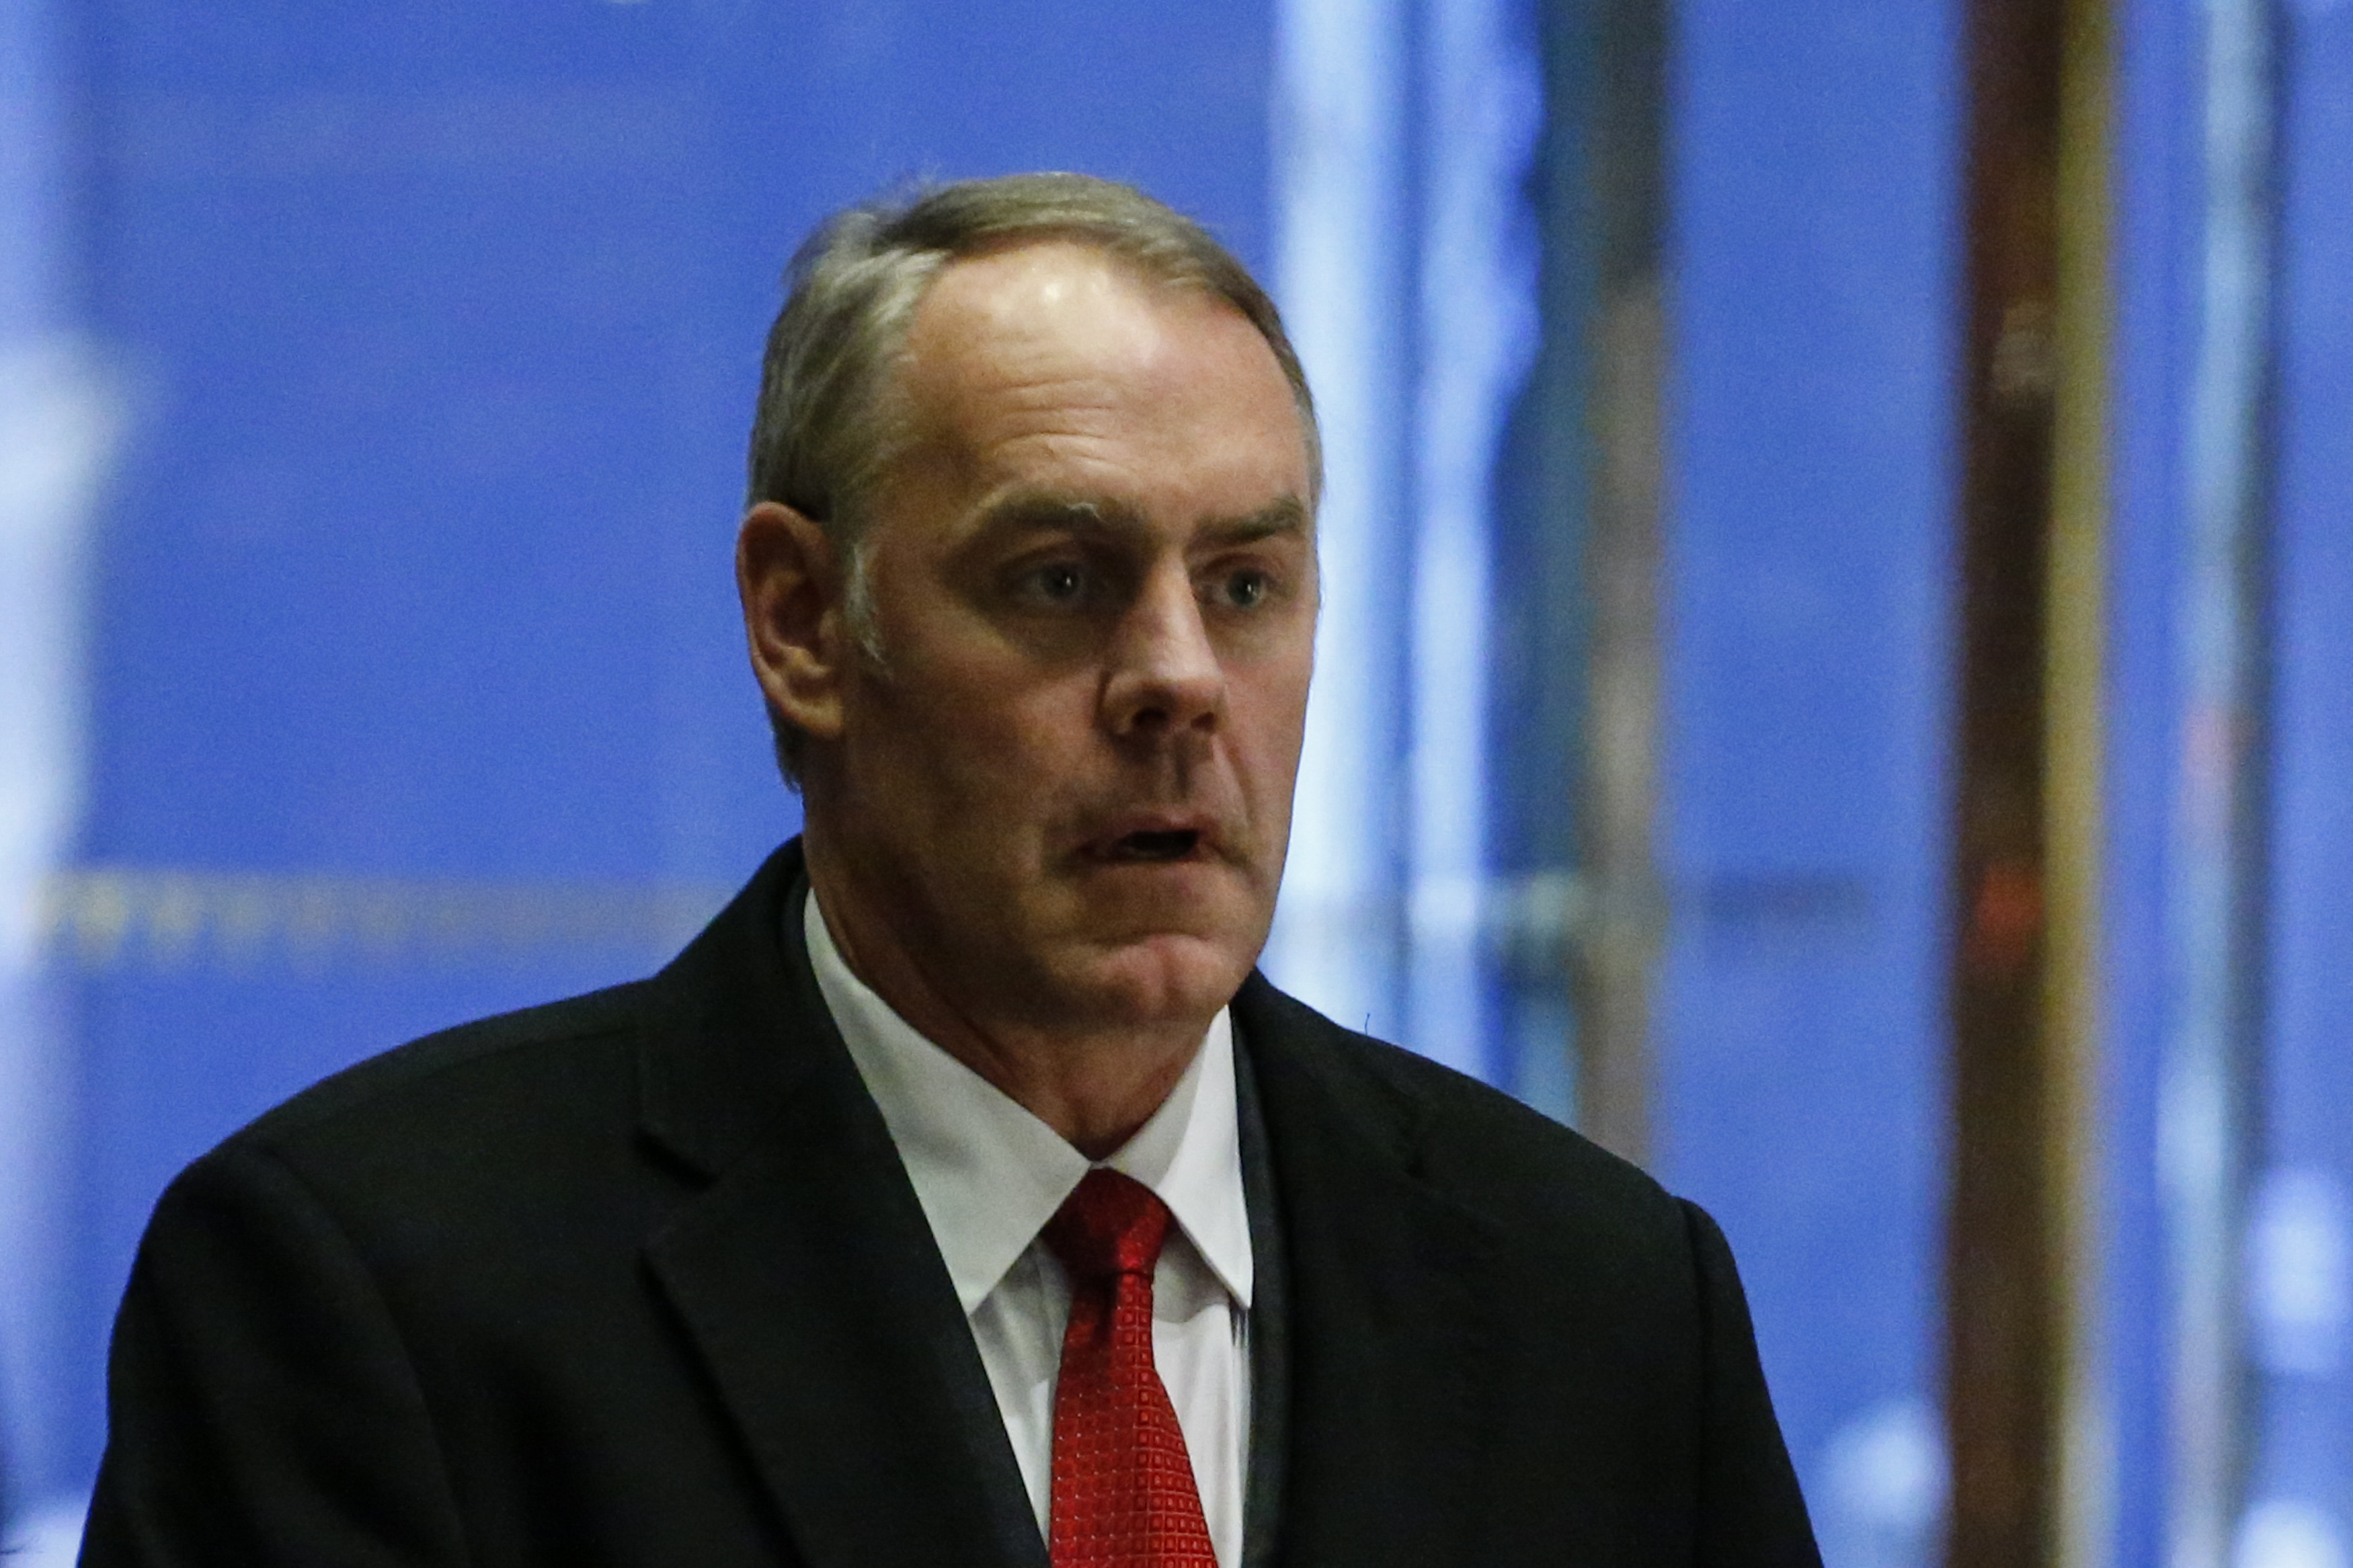 Ryan Zinke 5 Fast Facts You Need To Know